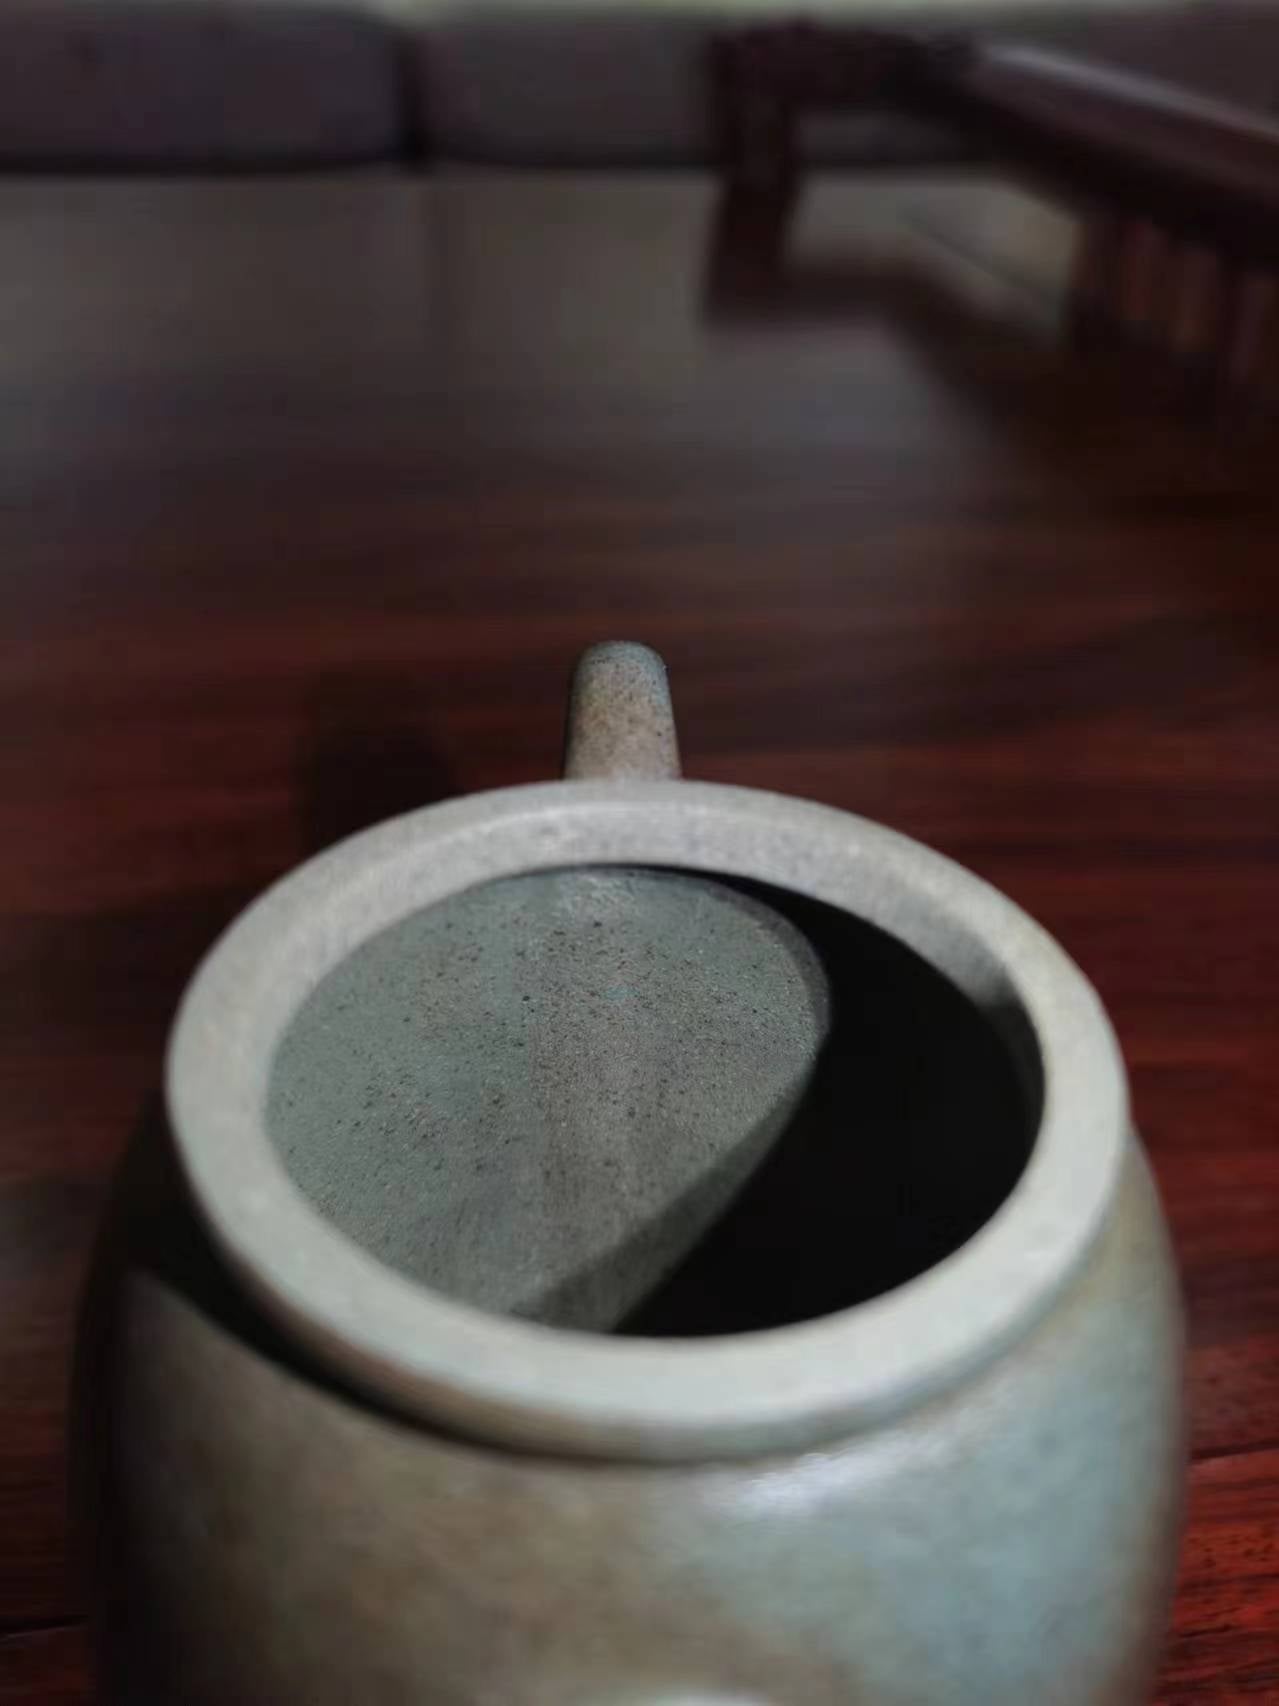 Siyutao Yixing Teapot ,Good harvest丰收,wood fired in dragon kiln ,180ml,full handmade,Authentic Yixing Ben shan Lv Ni from Huang long mine 4 &aged 35 years,Gu Fa Lian ni (Most Archaic Clay Forming),（only one piece） - SiYuTao Teapot